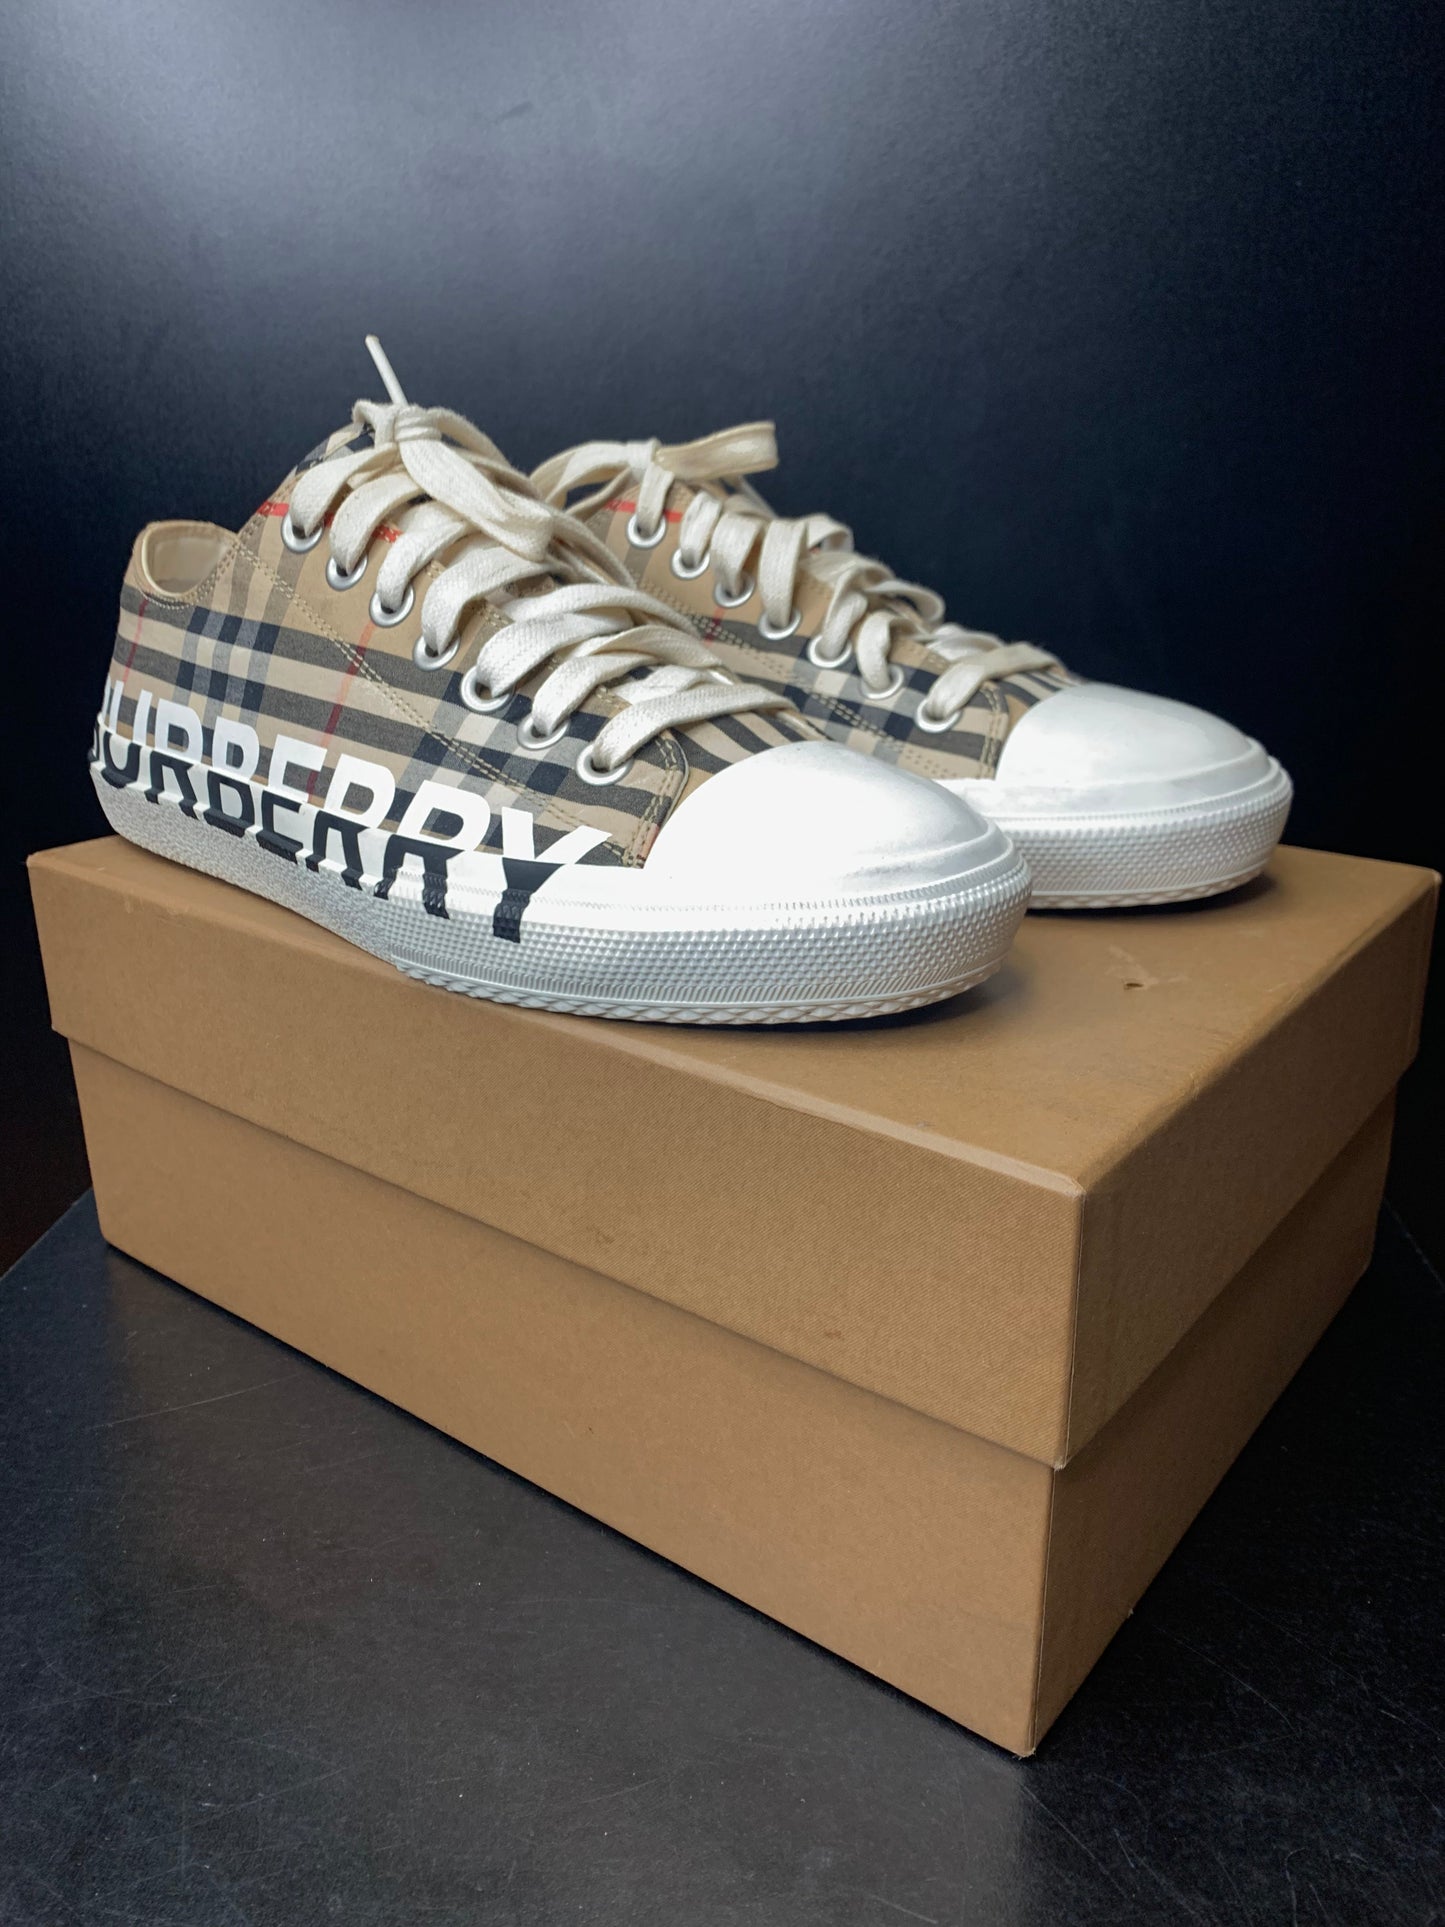 Shoes Designer By Burberry  Size: 11